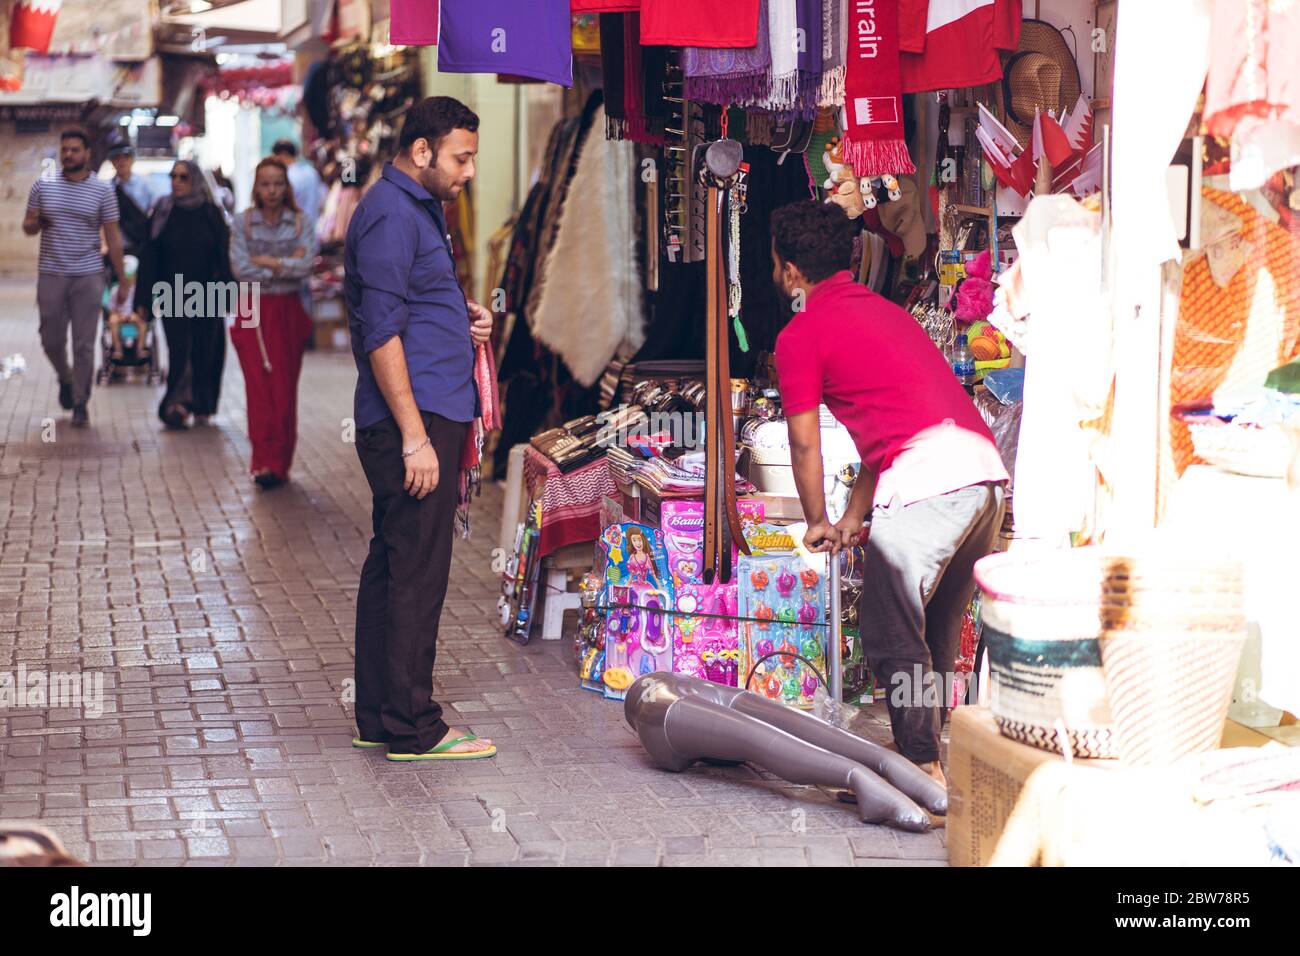 Bahrain city / Bahrain - January 15, 2020: Local Muslim people shopping in souq bazaar area in old town downtown Bahrain Stock Photo